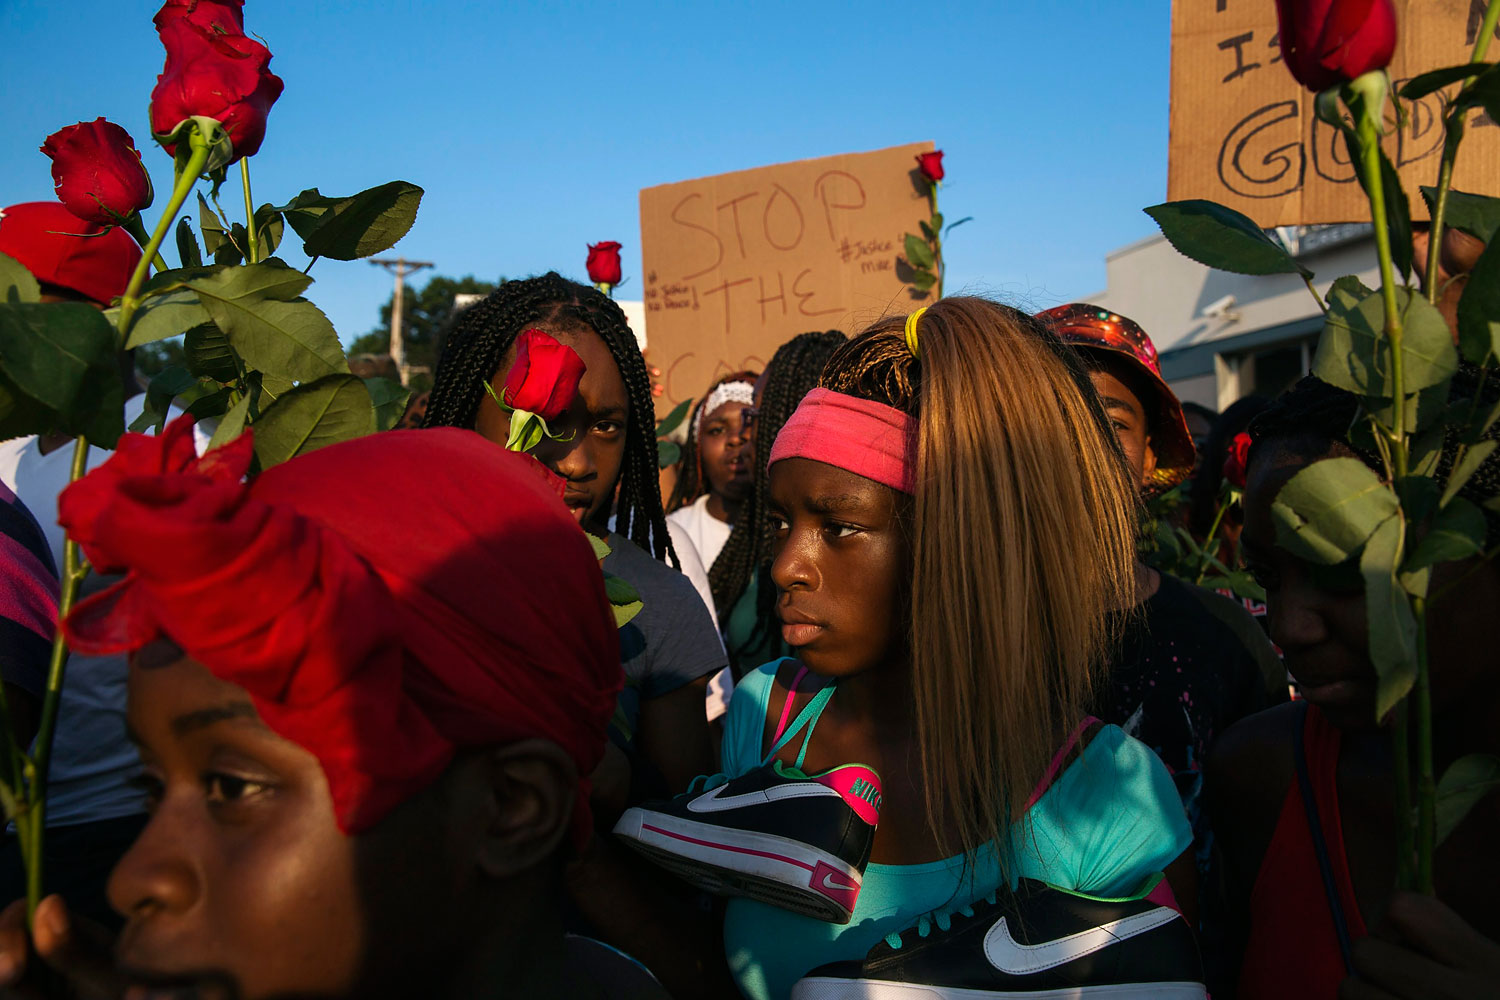 Demonstrators march down West Florissant during a peaceful march in reaction to the shooting of Michael Brown, near Ferguson, Missouri